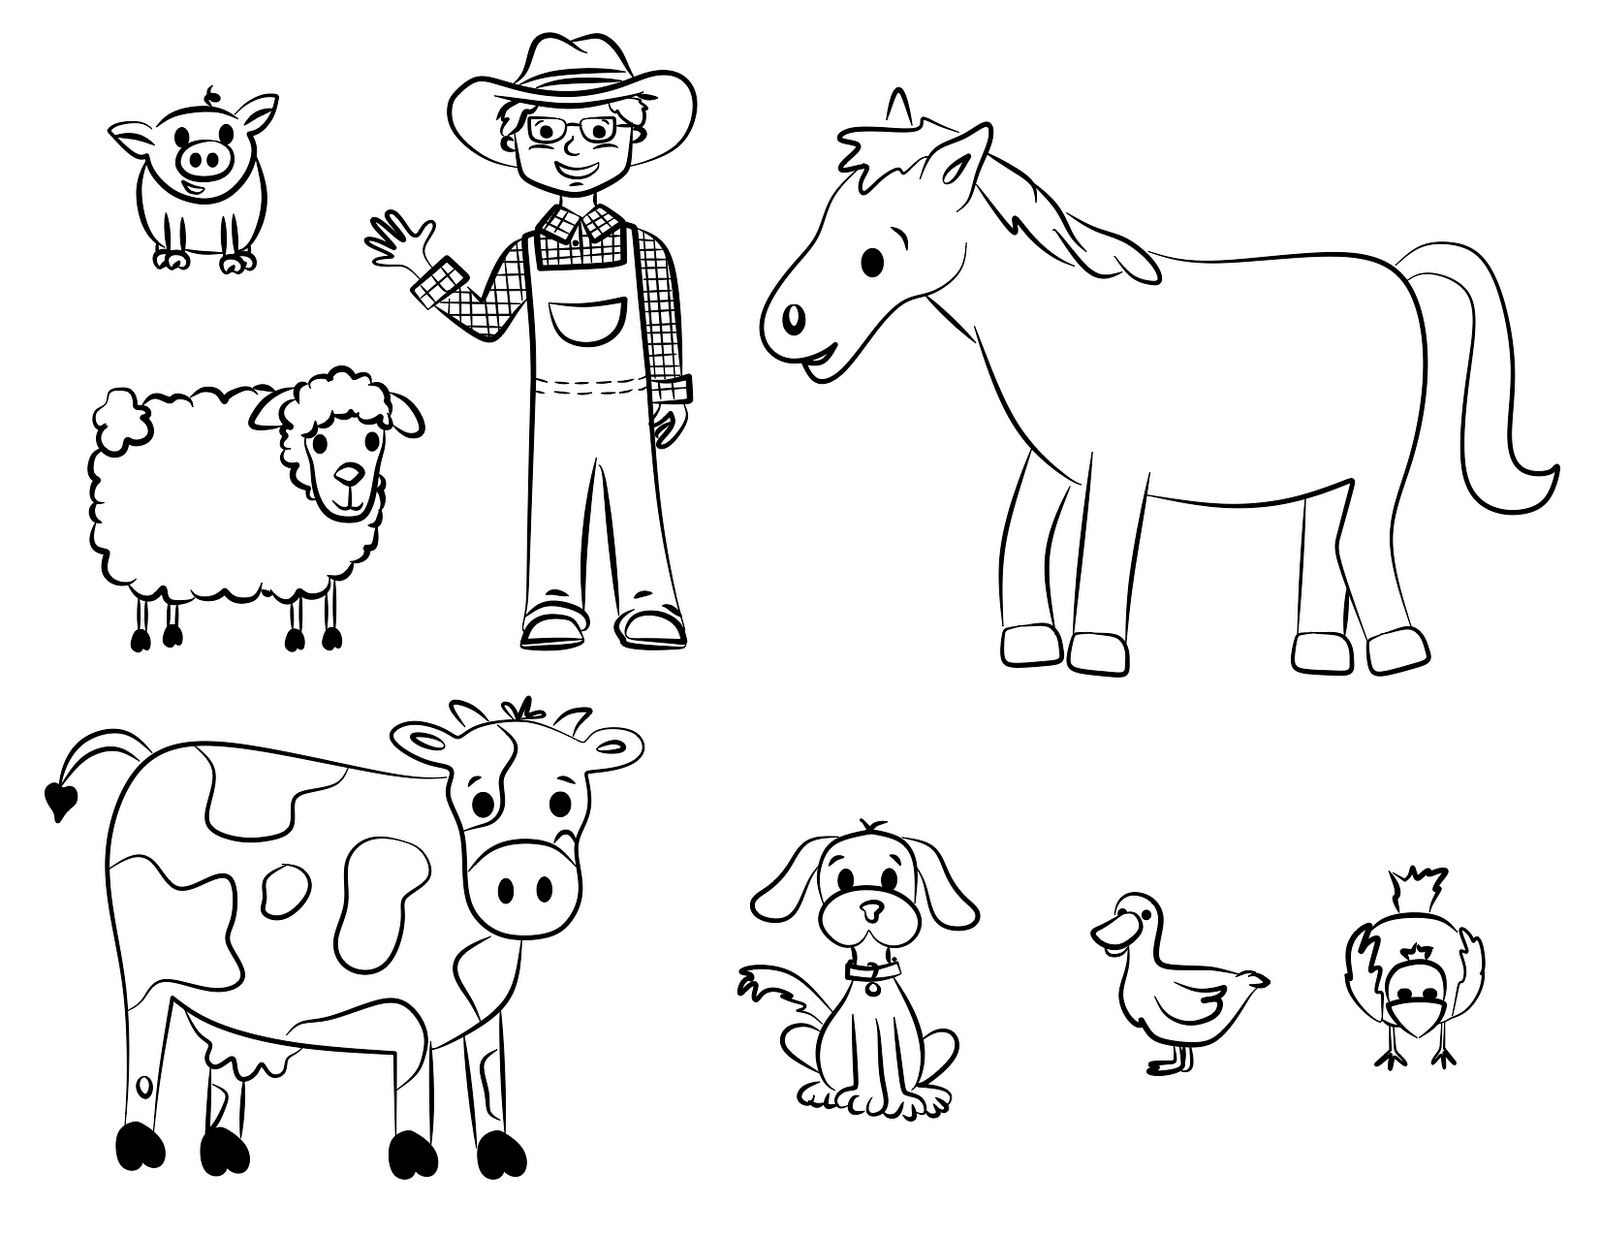 Coloring Pages : Farmnimal Coloring Book Free Printable Pages For - Free Printable Farm Animal Pictures